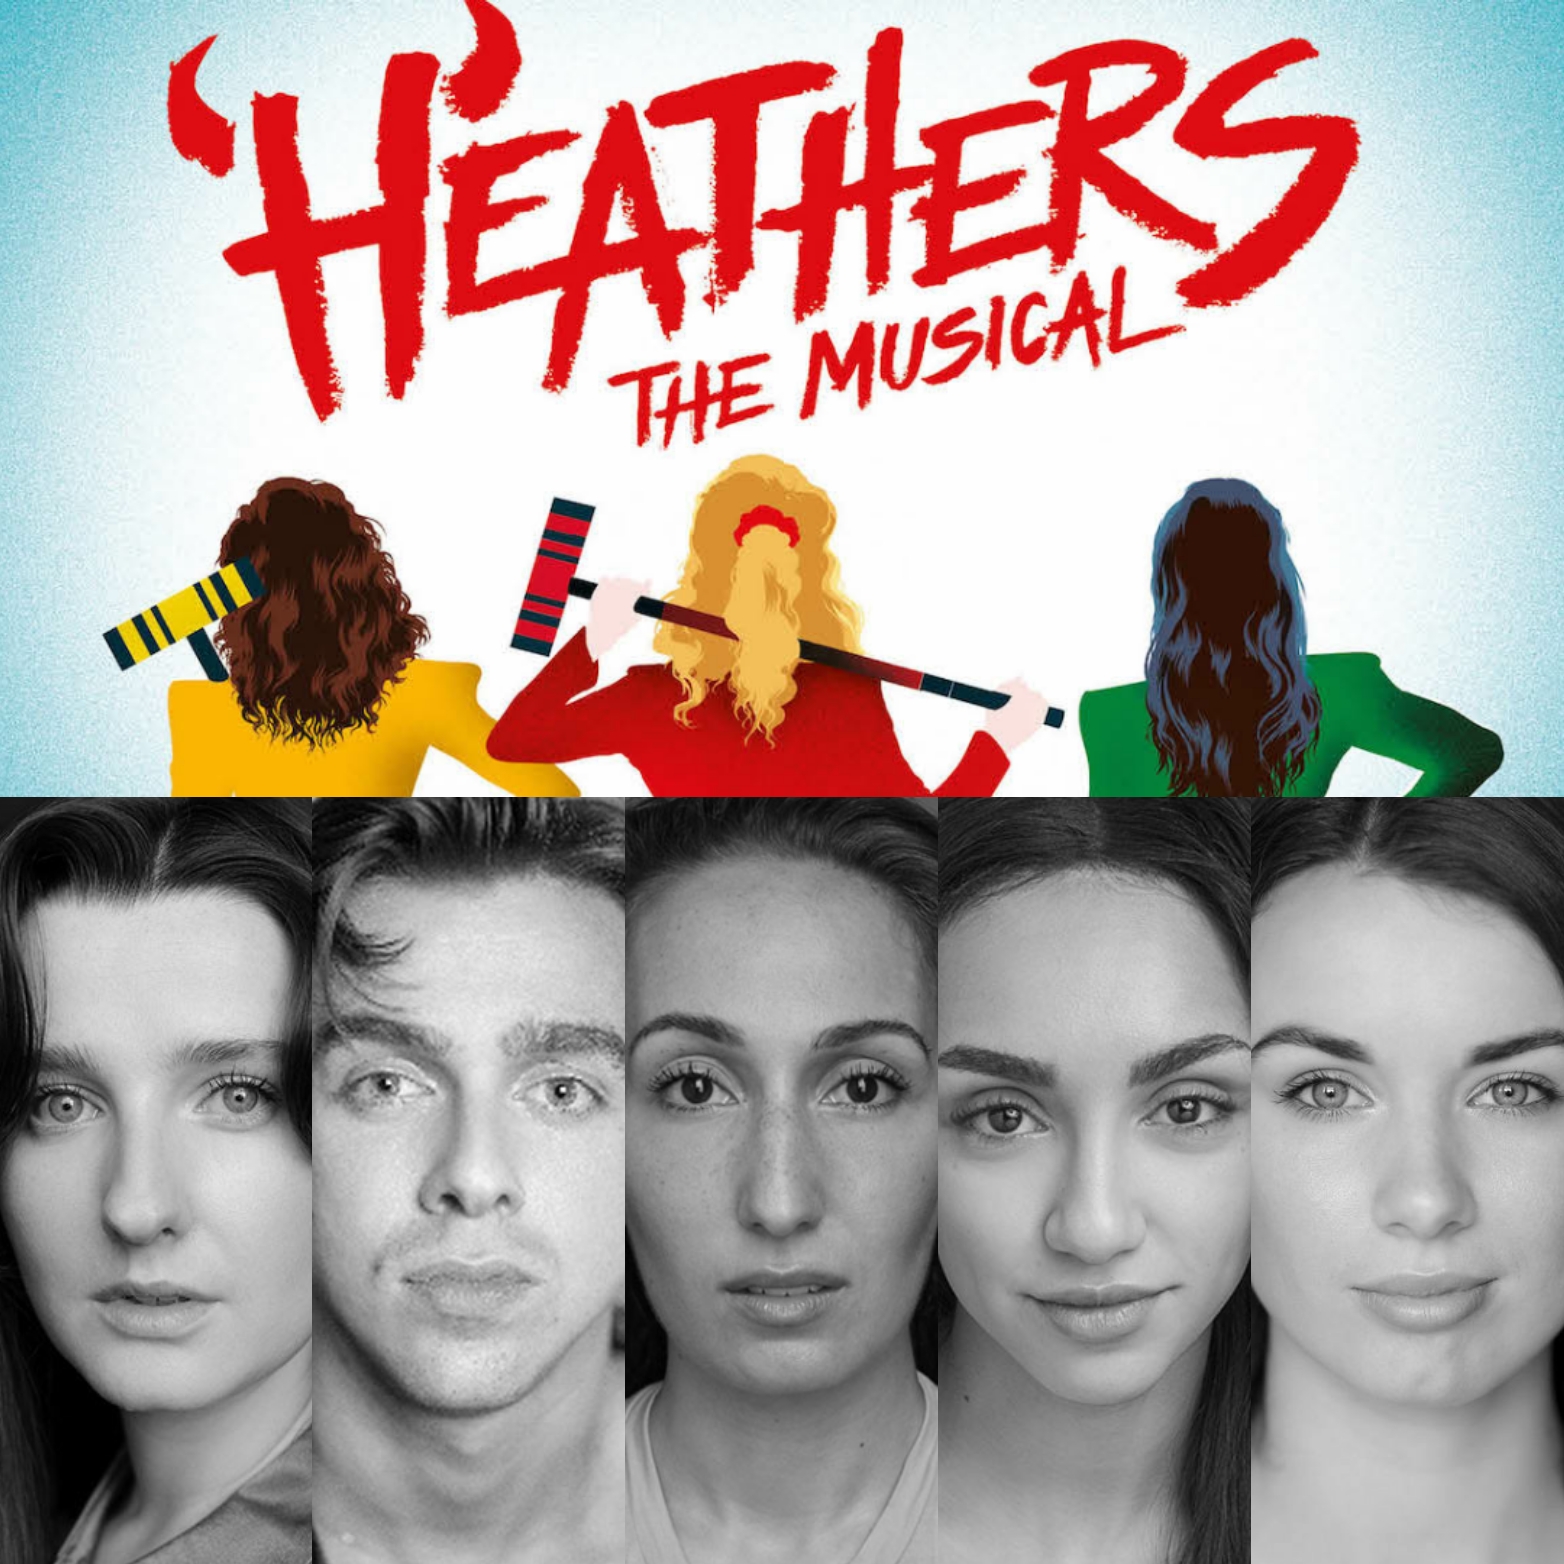 Drama Club Drama Queen Fan Casting for Heathers The Musical